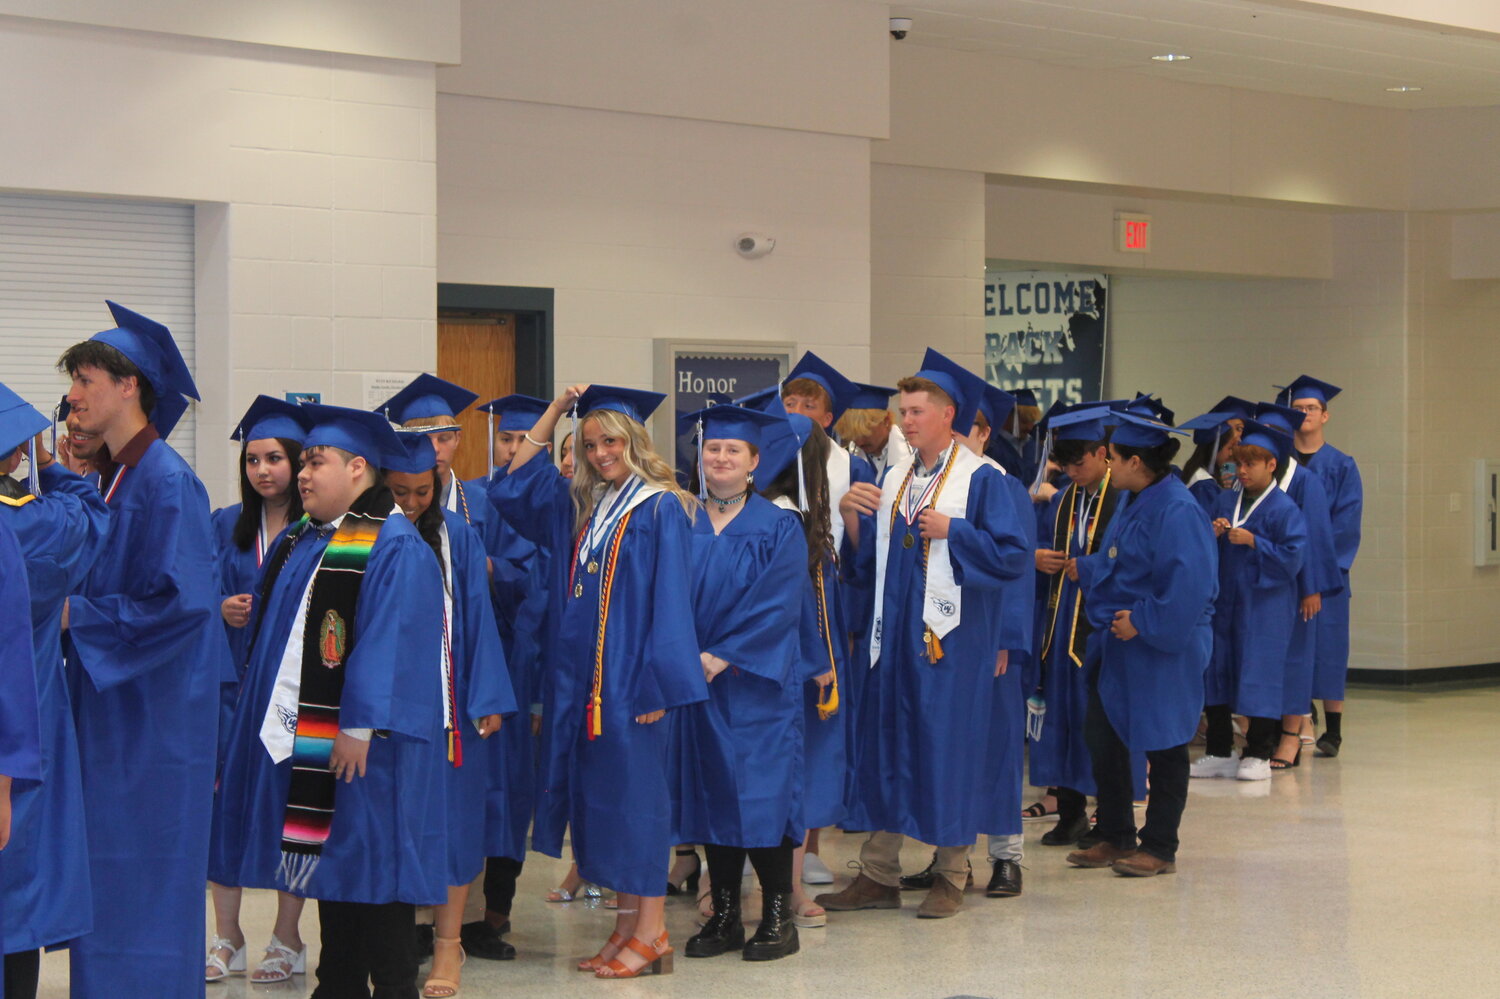 Seniors line up to march in to the gym for their graduation ceremony Sunday, May 28.